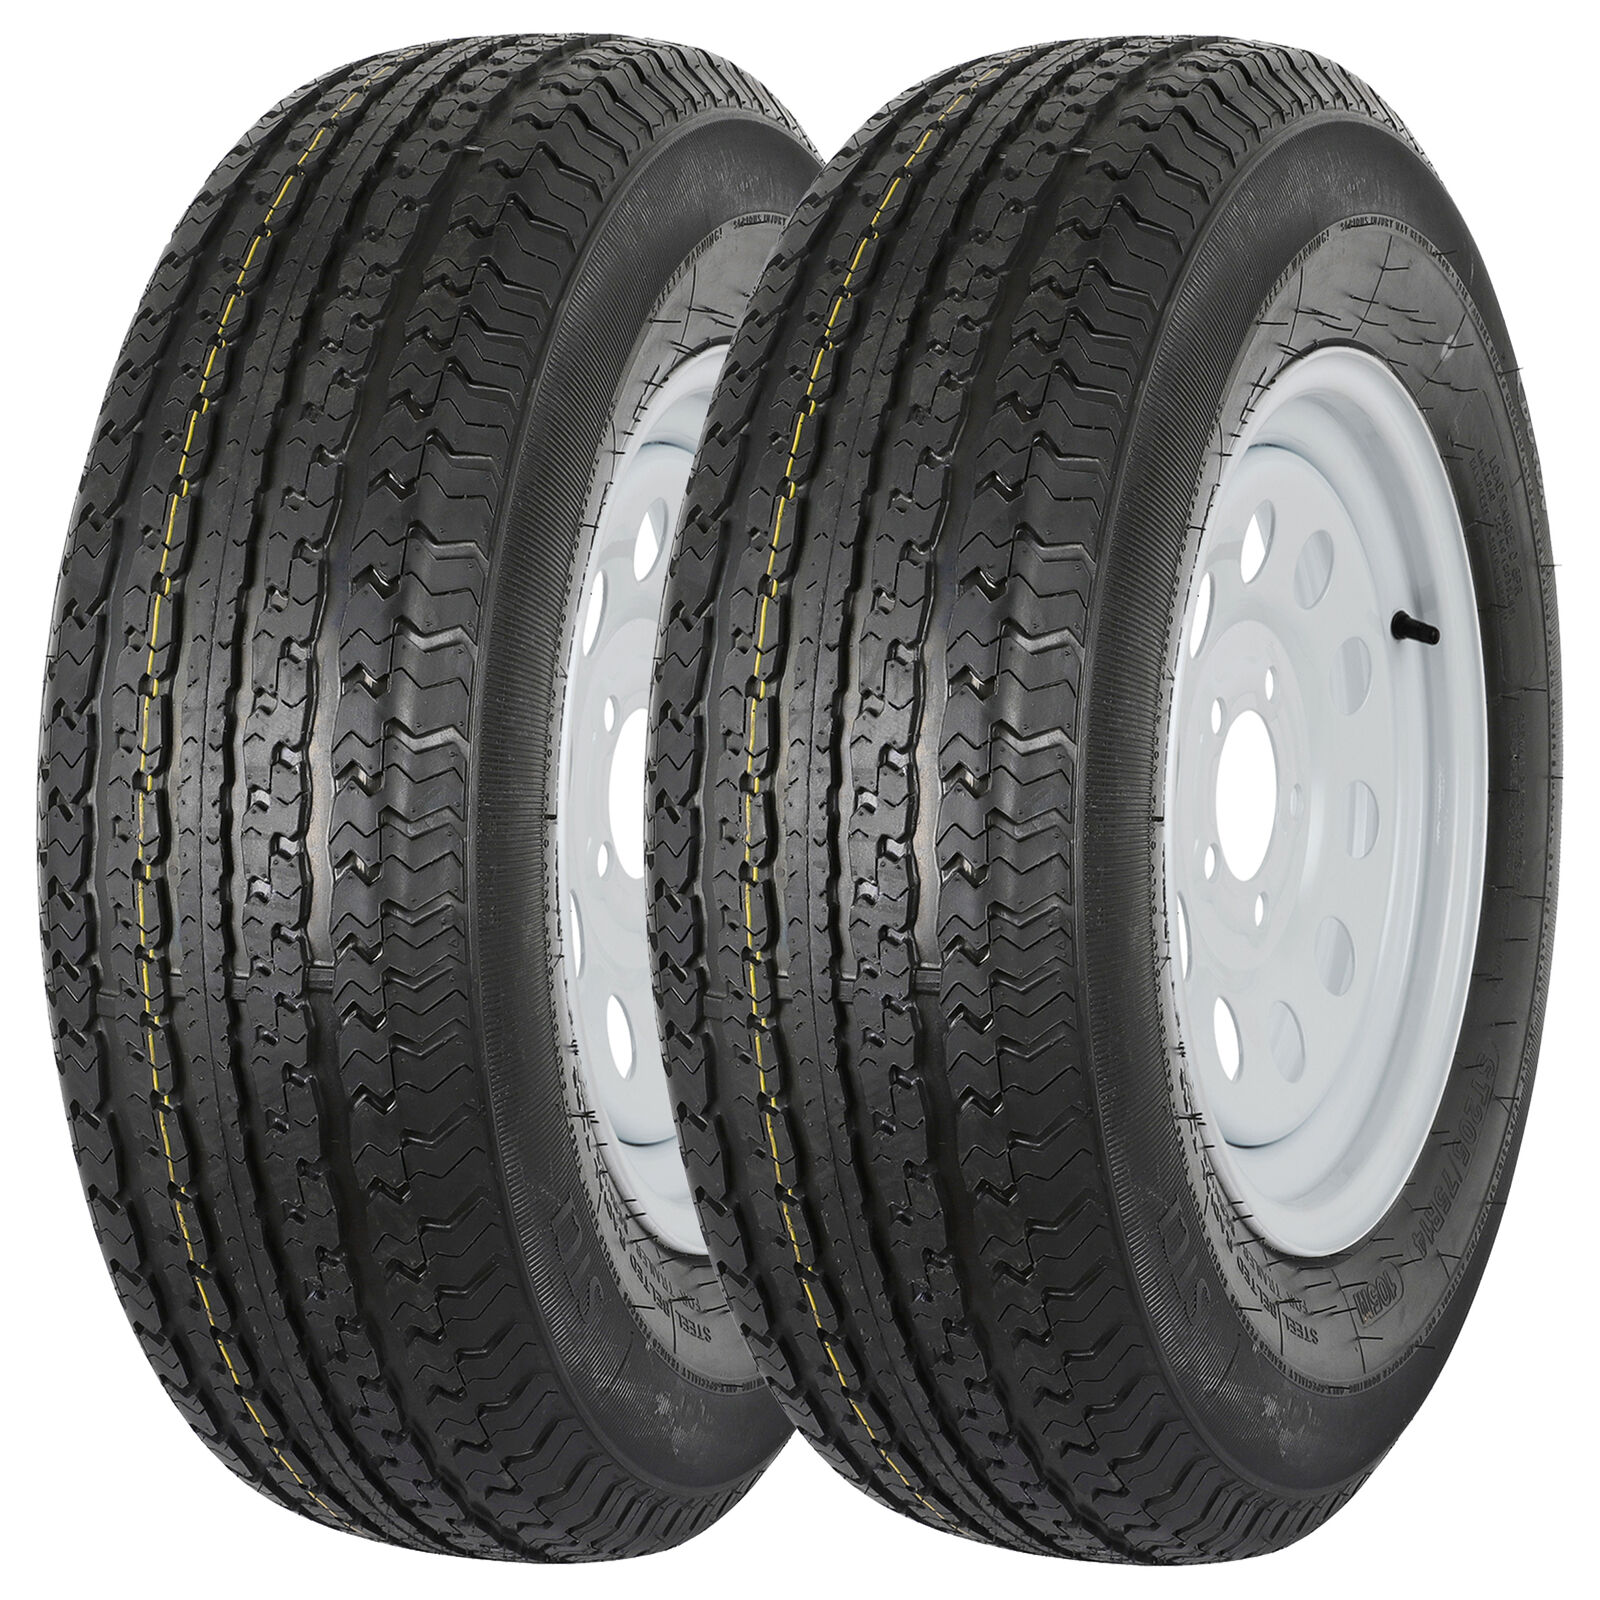 ST205/75R14 Radial Trailer Tire with Rim, 8-Ply Load Range D, Set of 2